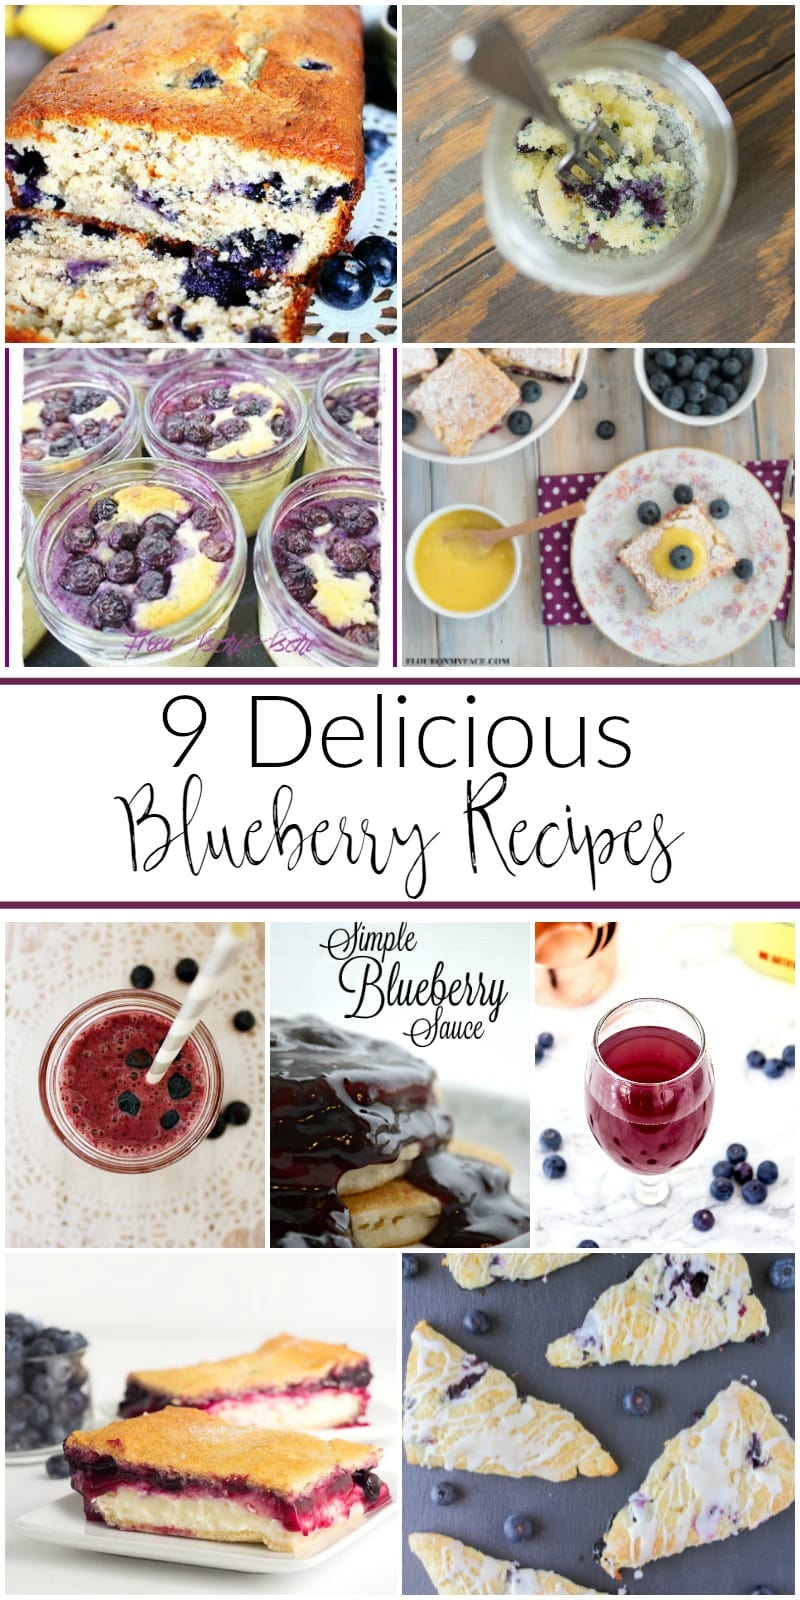 9 Delicious Blueberry Recipes perfect for Summer!